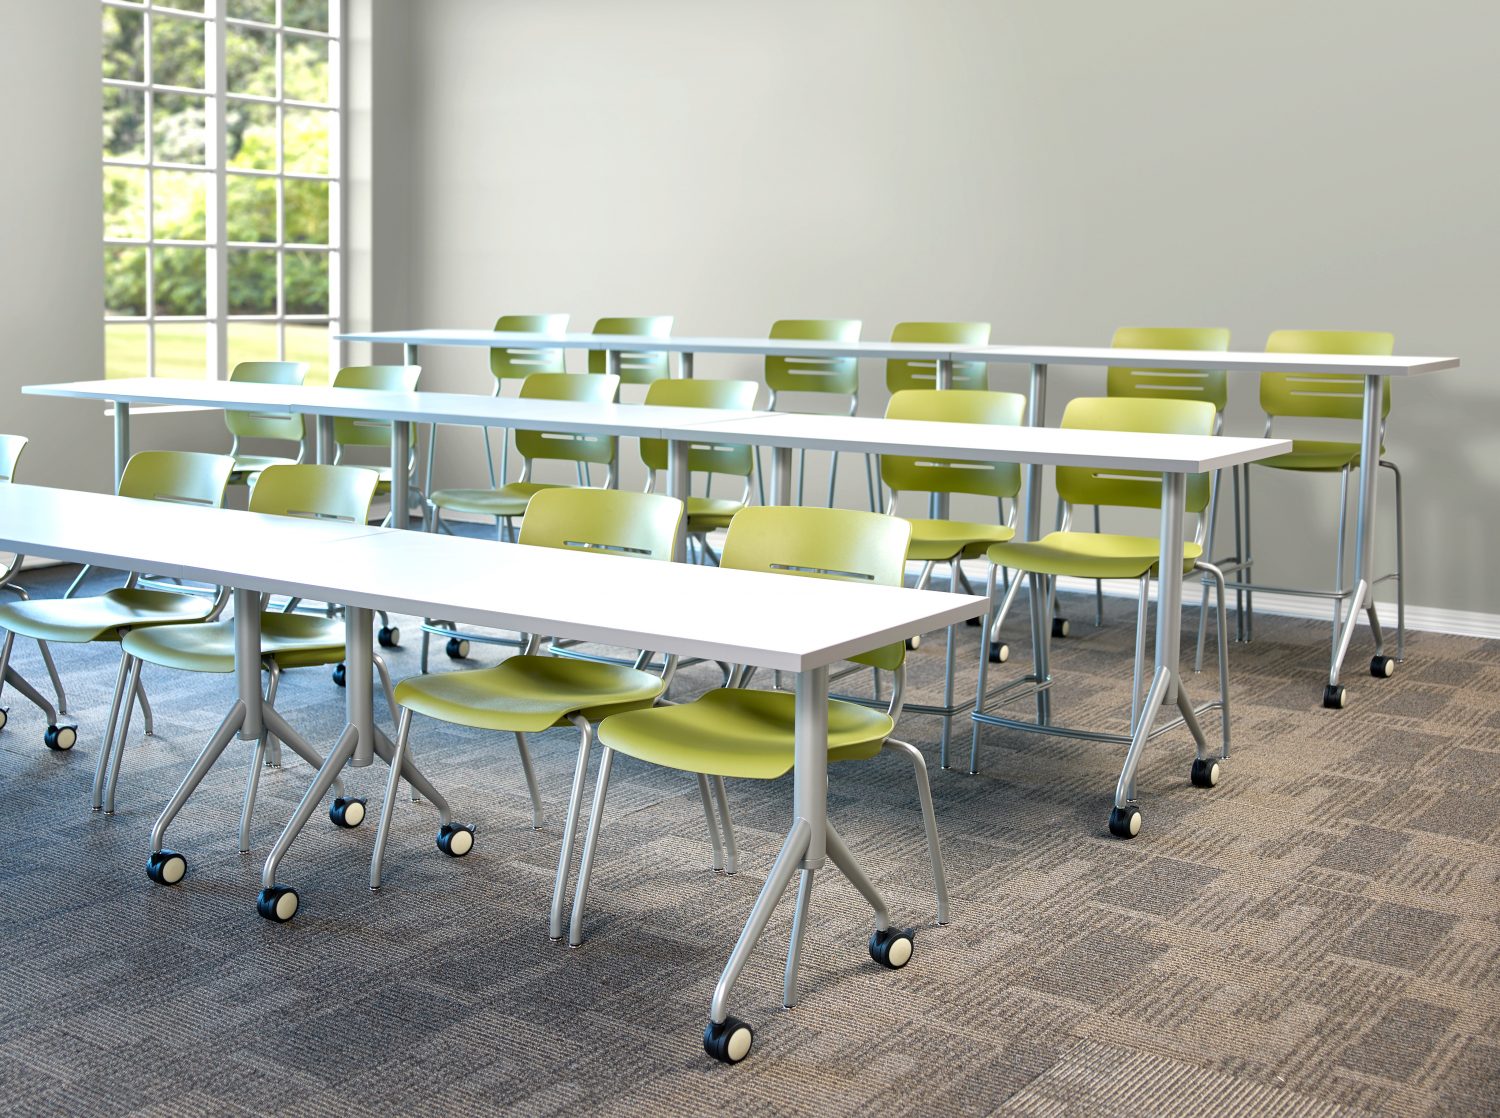 Classroom with tiered tables to create stadium seating